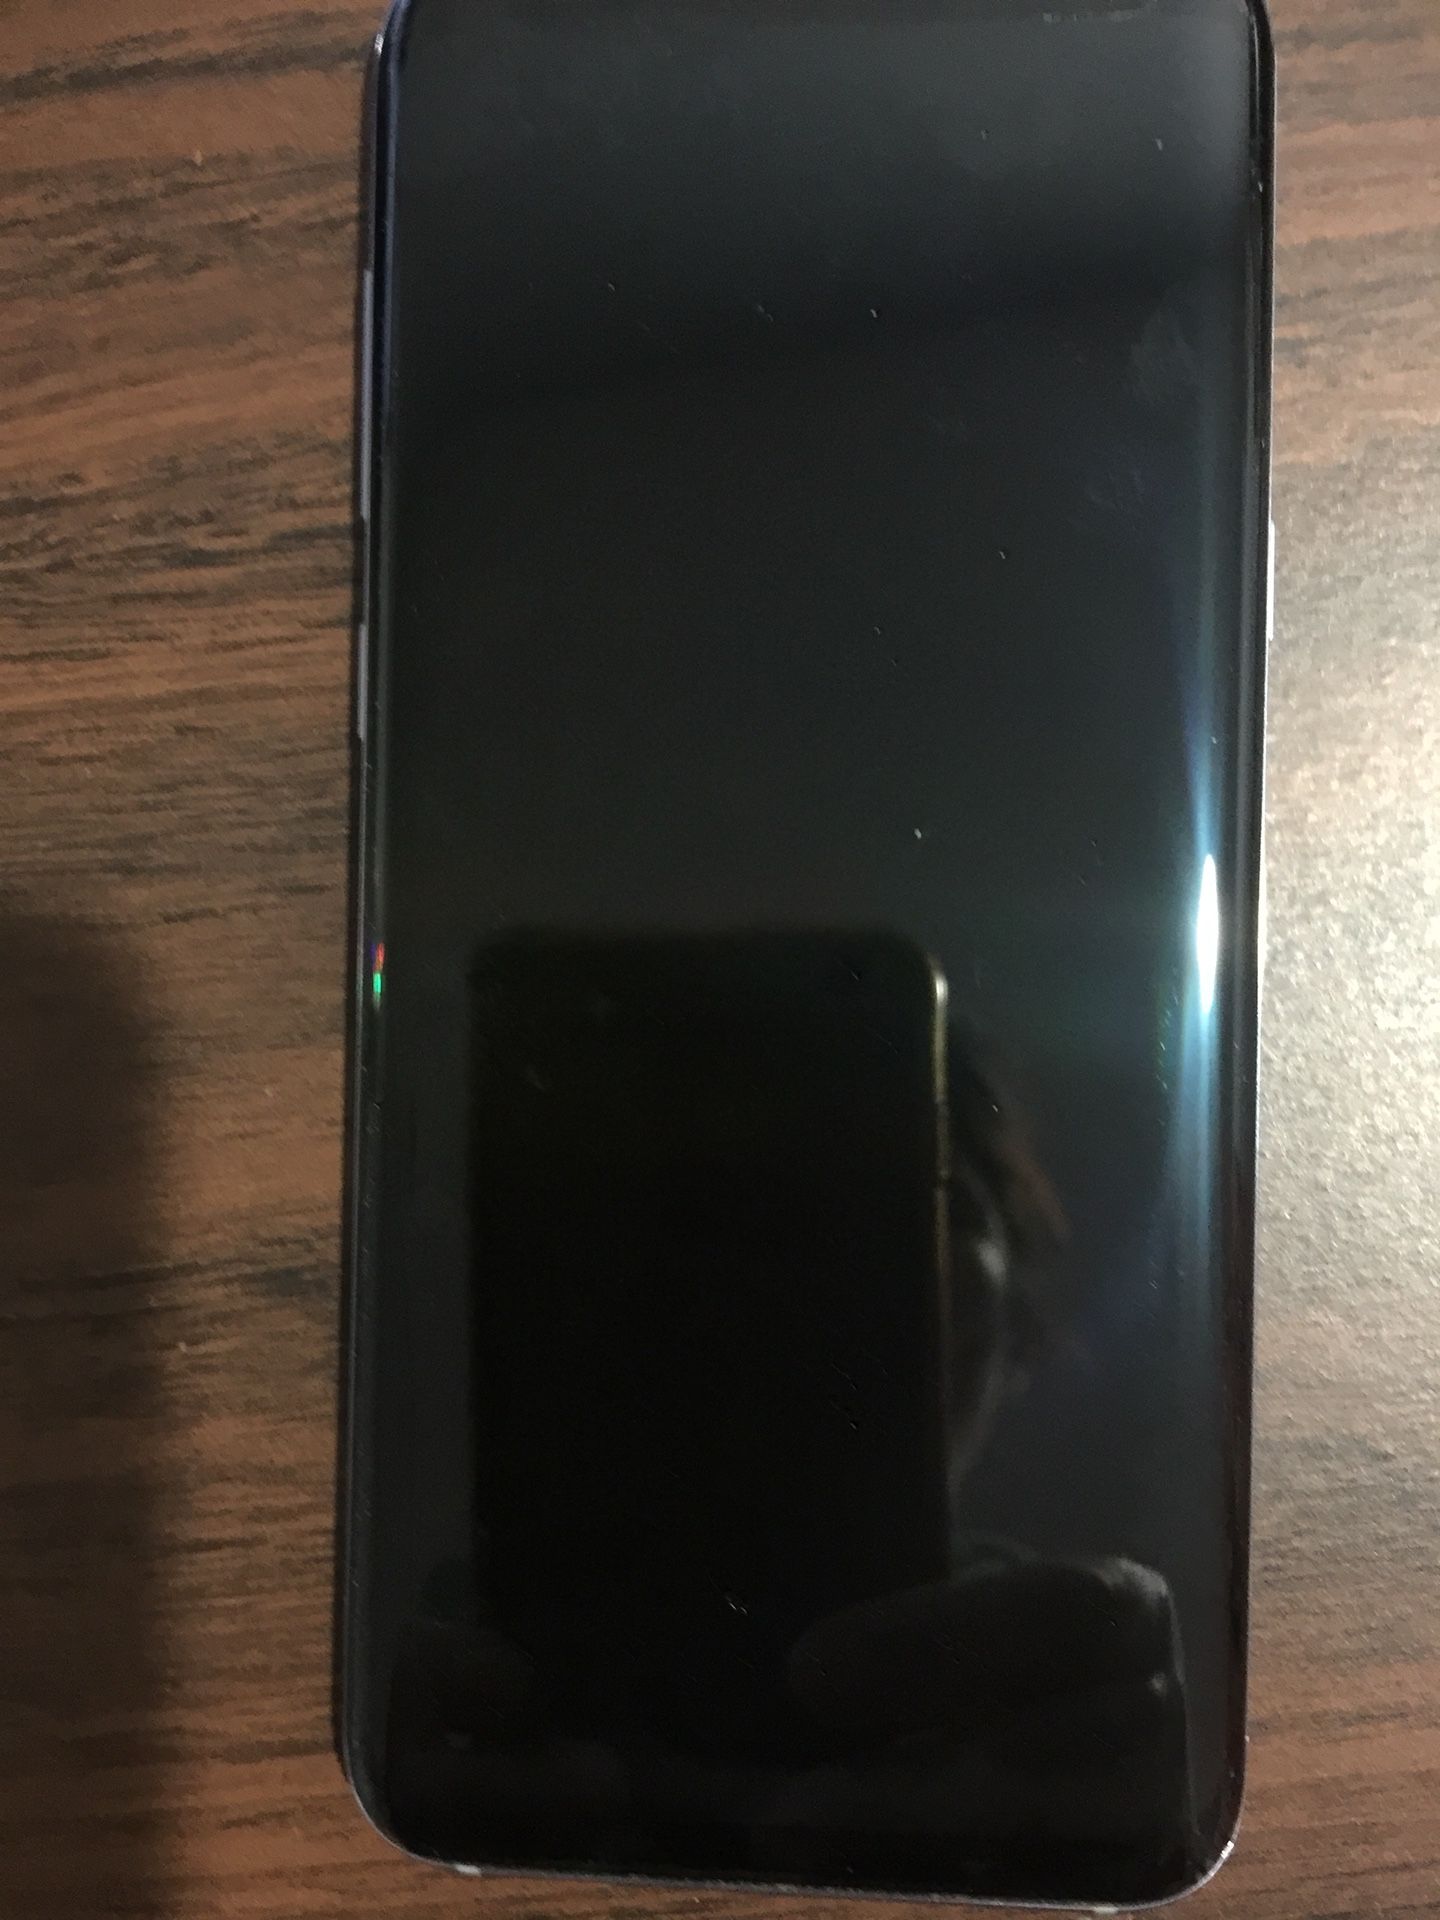 Samsung galaxy s8plus new( used for 1 week)